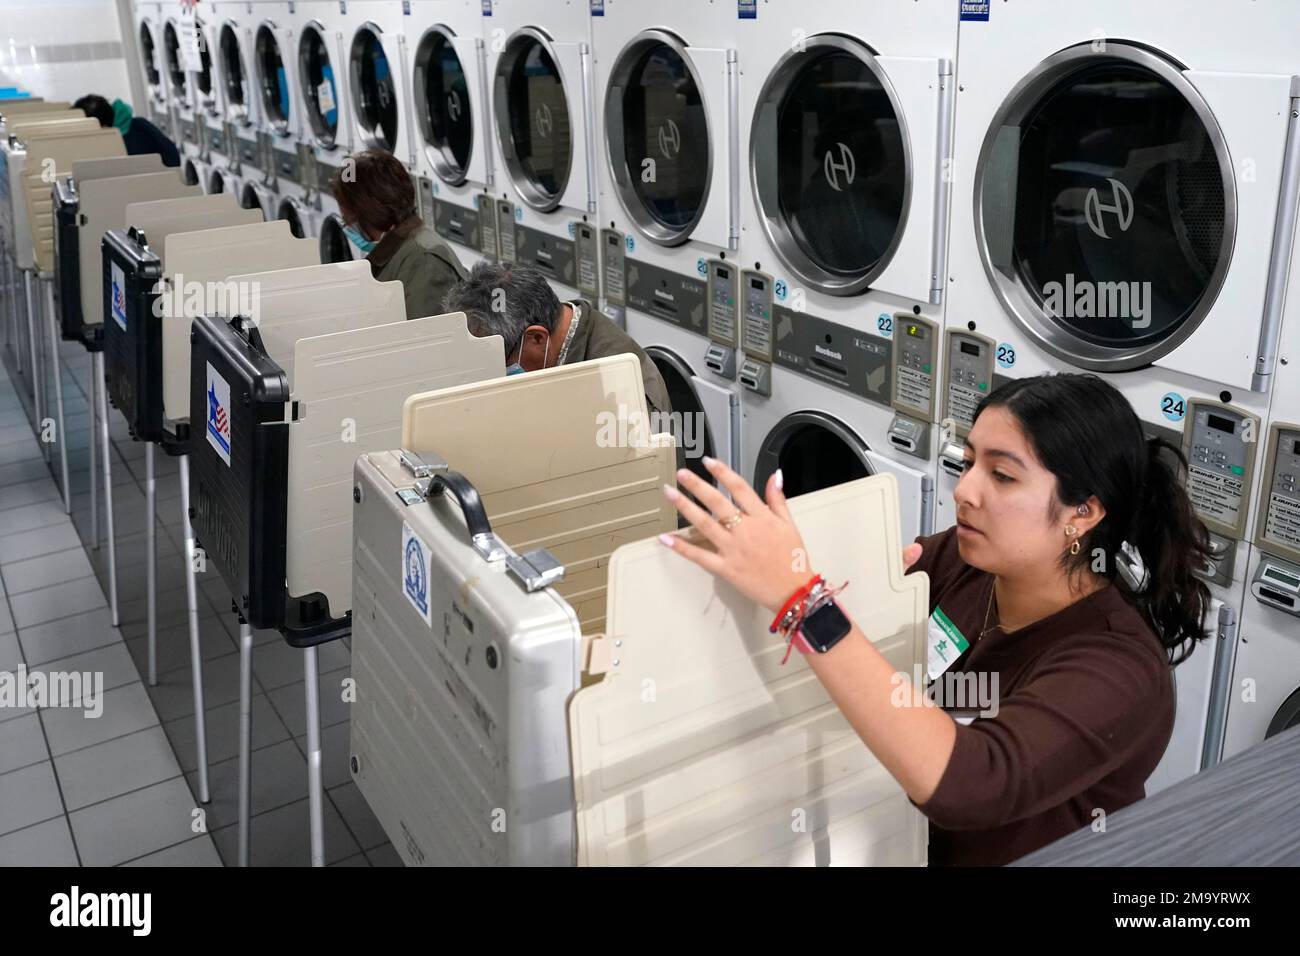 Poll worker Alany Gonzalez sets up another voting booth in front of dryers  at the Su Nueva Lavanderia near Chicago's Midway Airport Tuesday, Nov. 8,  2022, in Chicago. (AP Photo/Charles Rex Arbogast